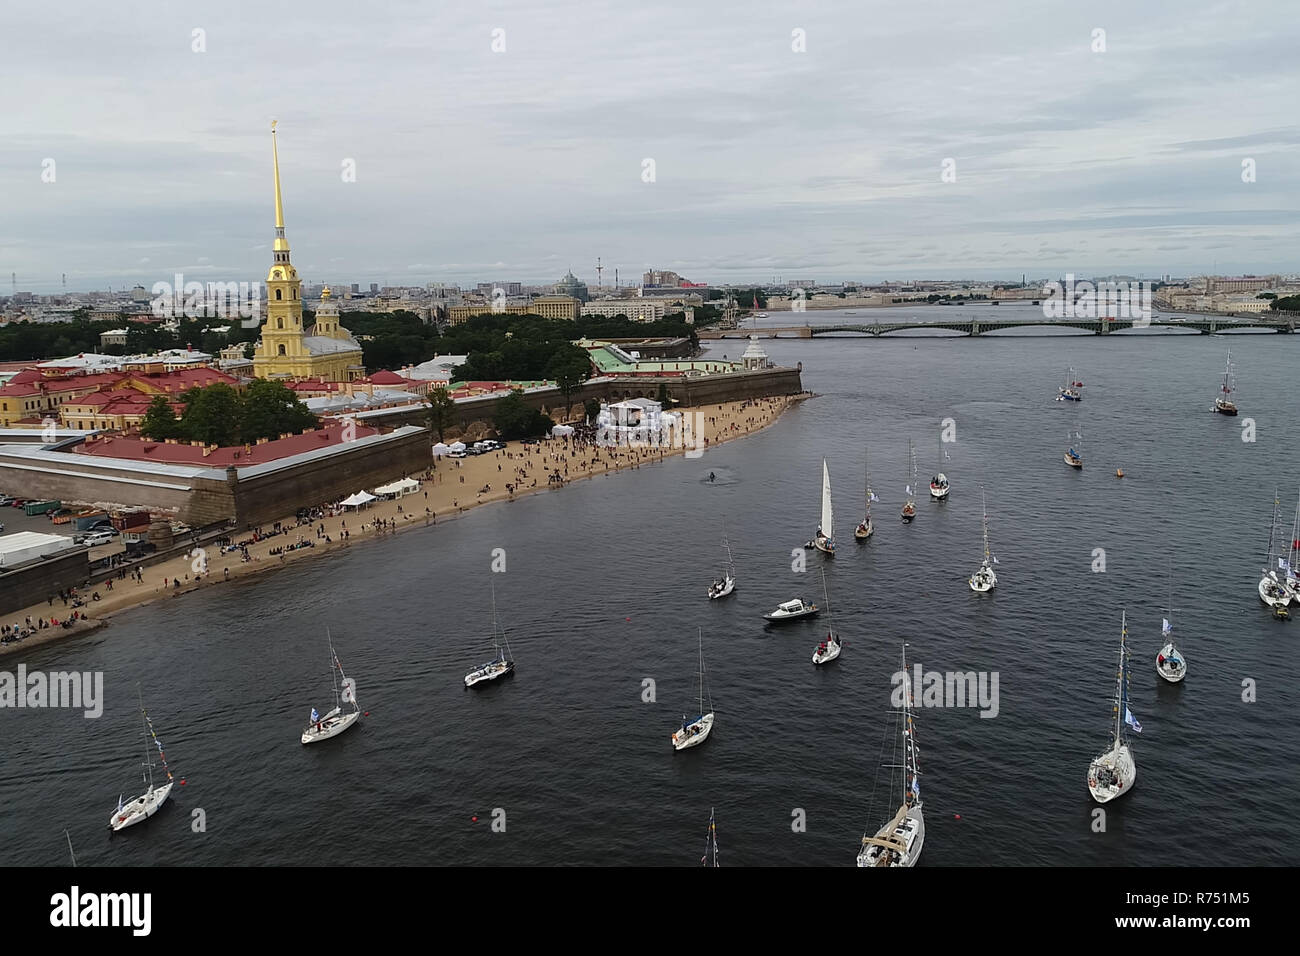 Festival of yachts in St. Petersburg on the river neve. Sailing yachts in the river Stock Photo